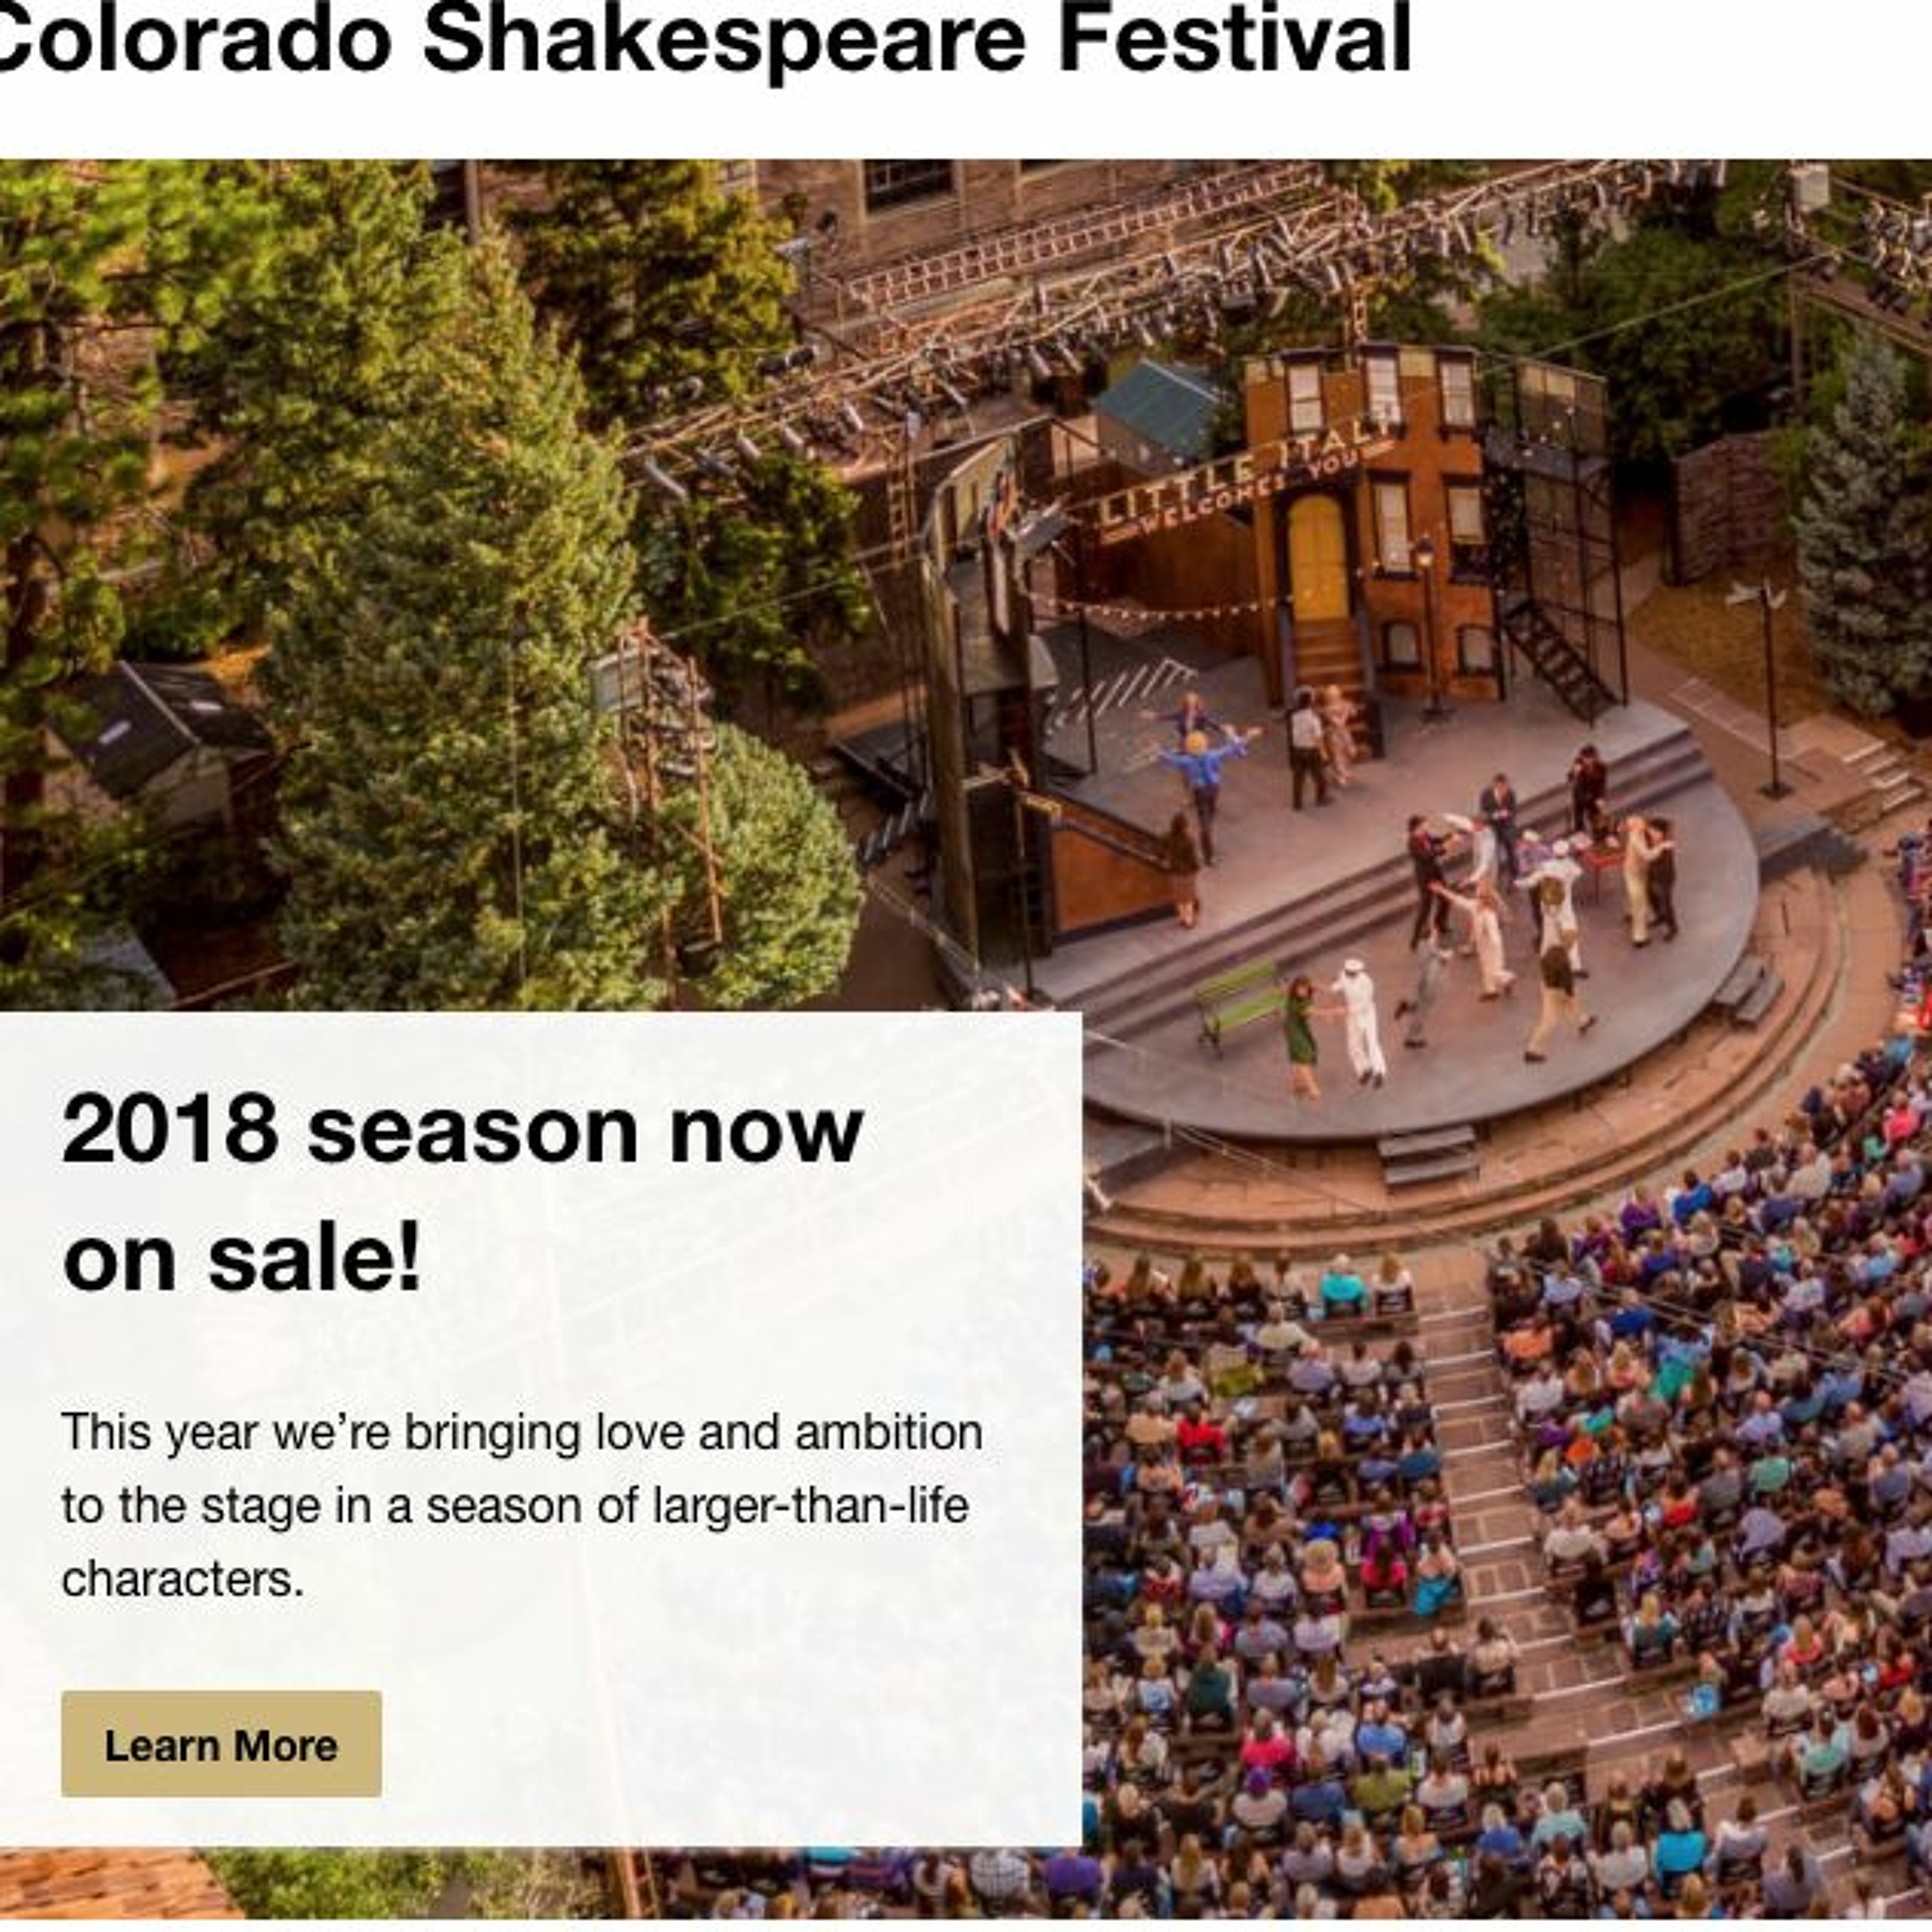 The Colorado Shakespeare Festival -- an Interview with Amanda Giguere